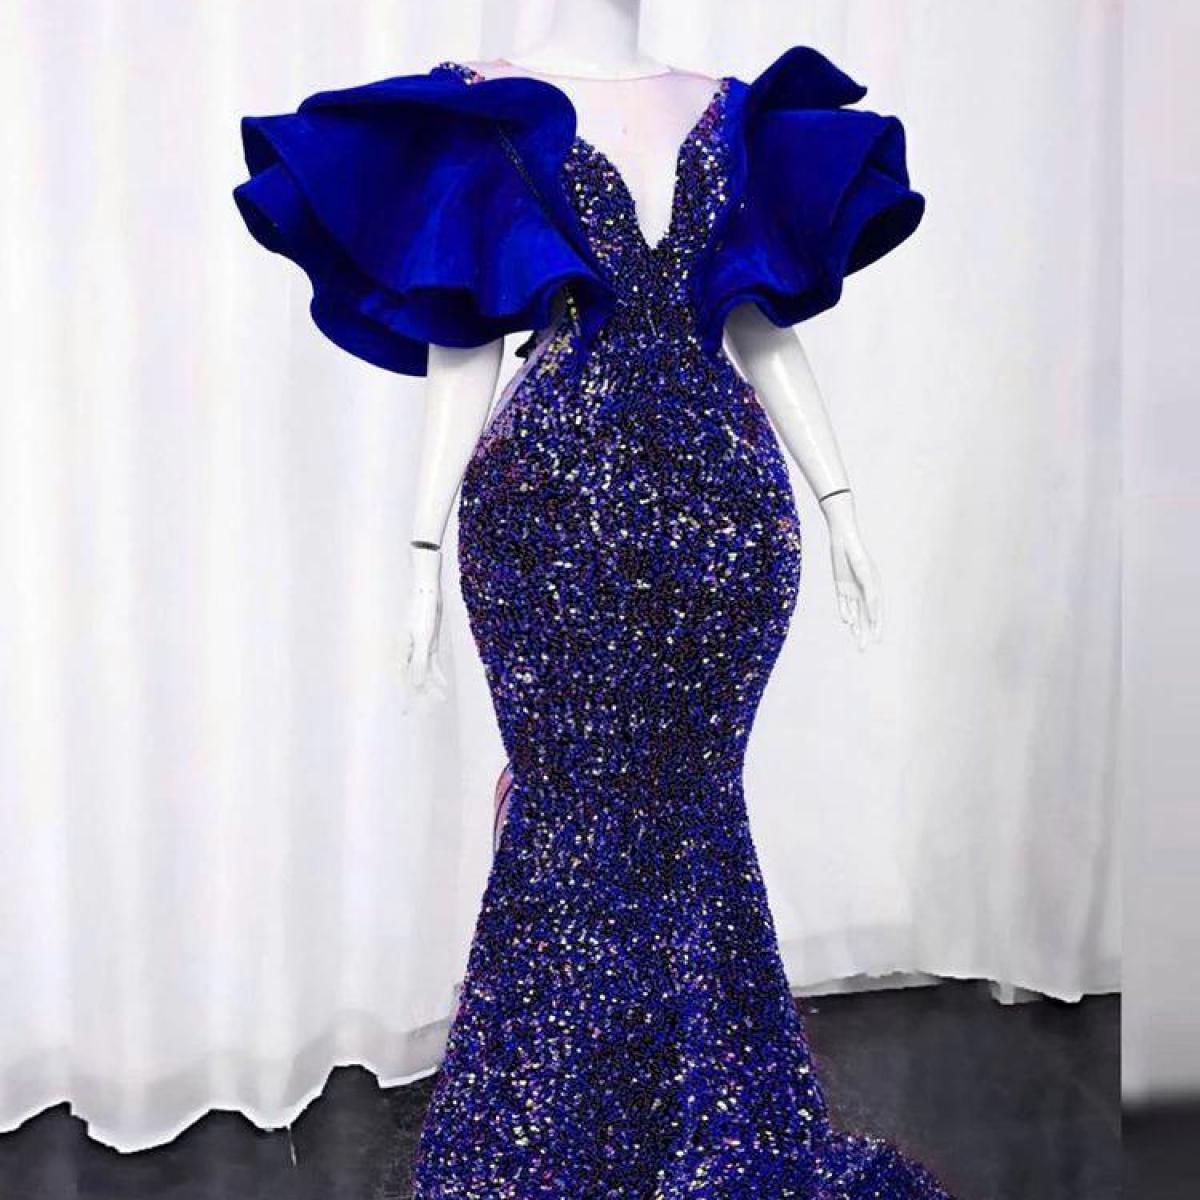 Stunning Evening Gown Moment at Miss Universe South Africa 2019